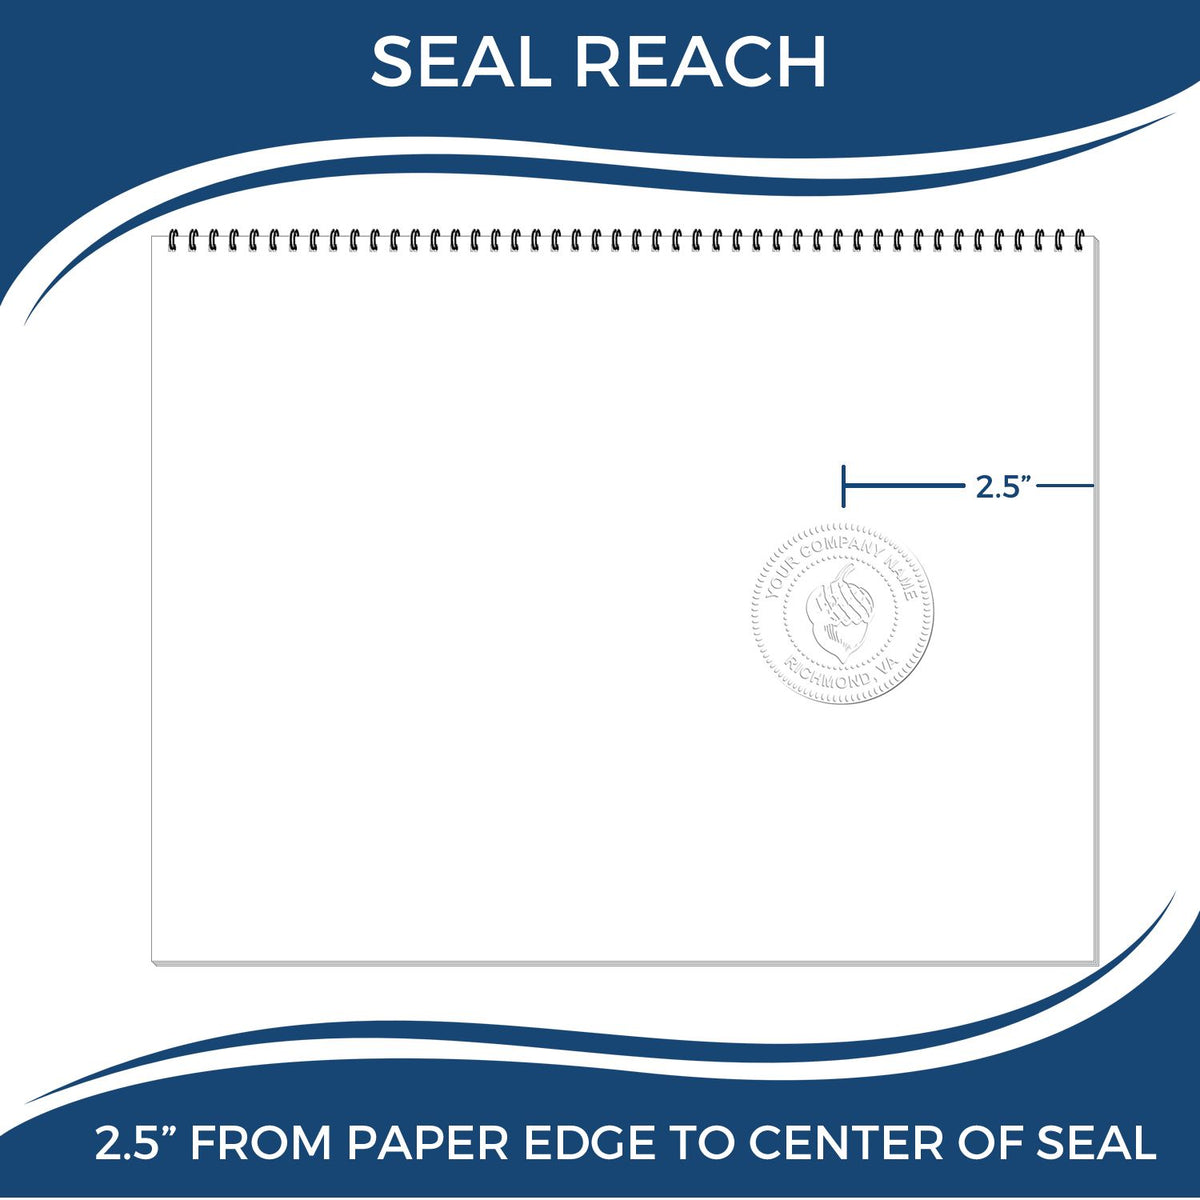 An infographic showing the seal reach which is represented by a ruler and a miniature seal image of the State of South Dakota Long Reach Architectural Embossing Seal